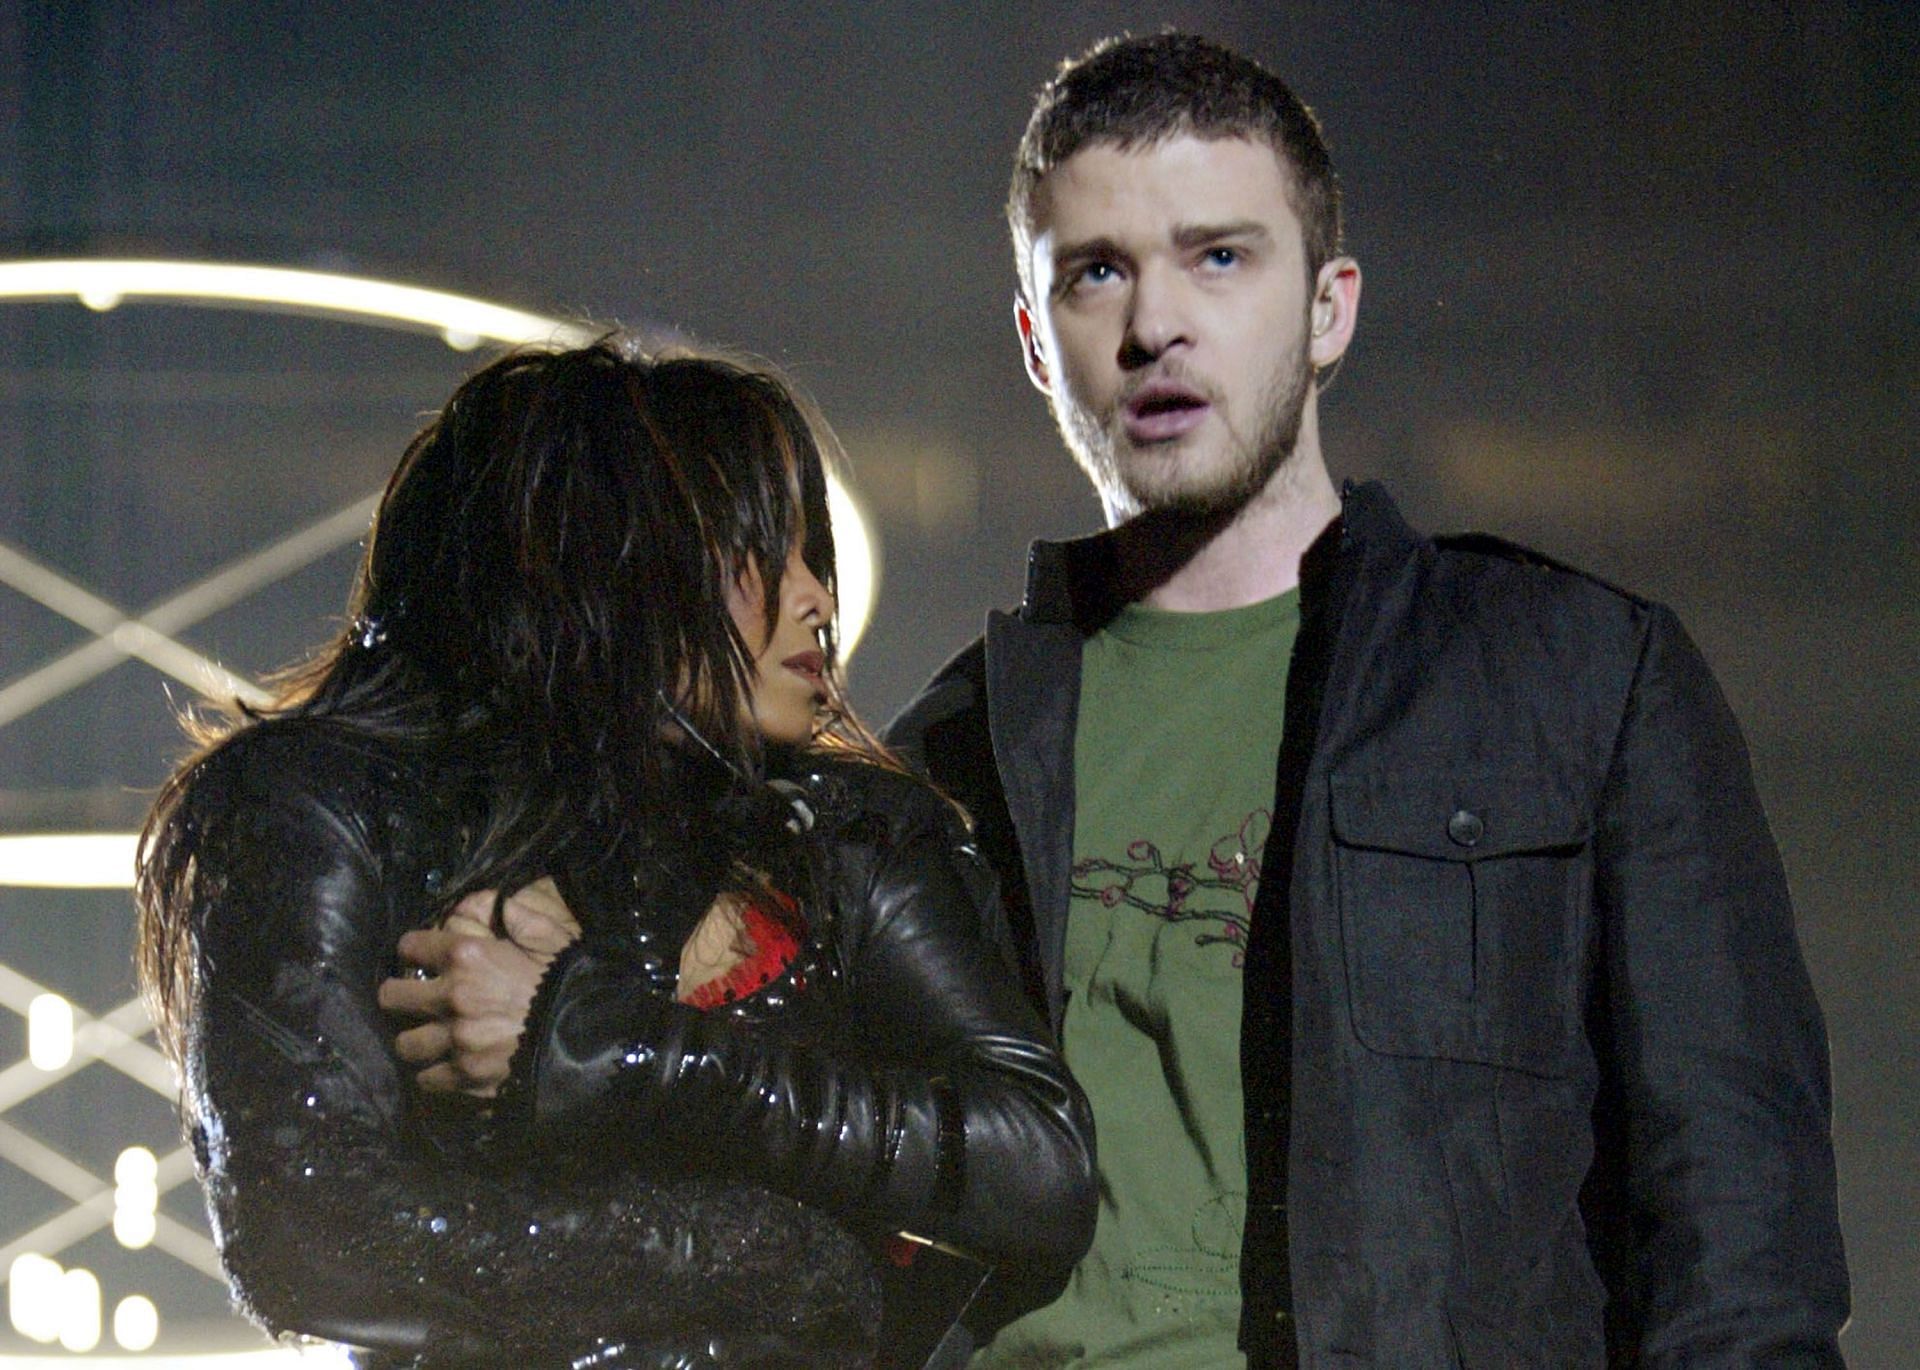 Janet Jackson and surprise guest Justin Timberlake perform during the halftime show at Super Bowl XXXVIII on February 1, 2004 in Houston, Texas. At the end of the performance, Timberlake tore away a piece of Jackson&#039;s outfit. (Photo by Frank Micelotta/Getty Images)